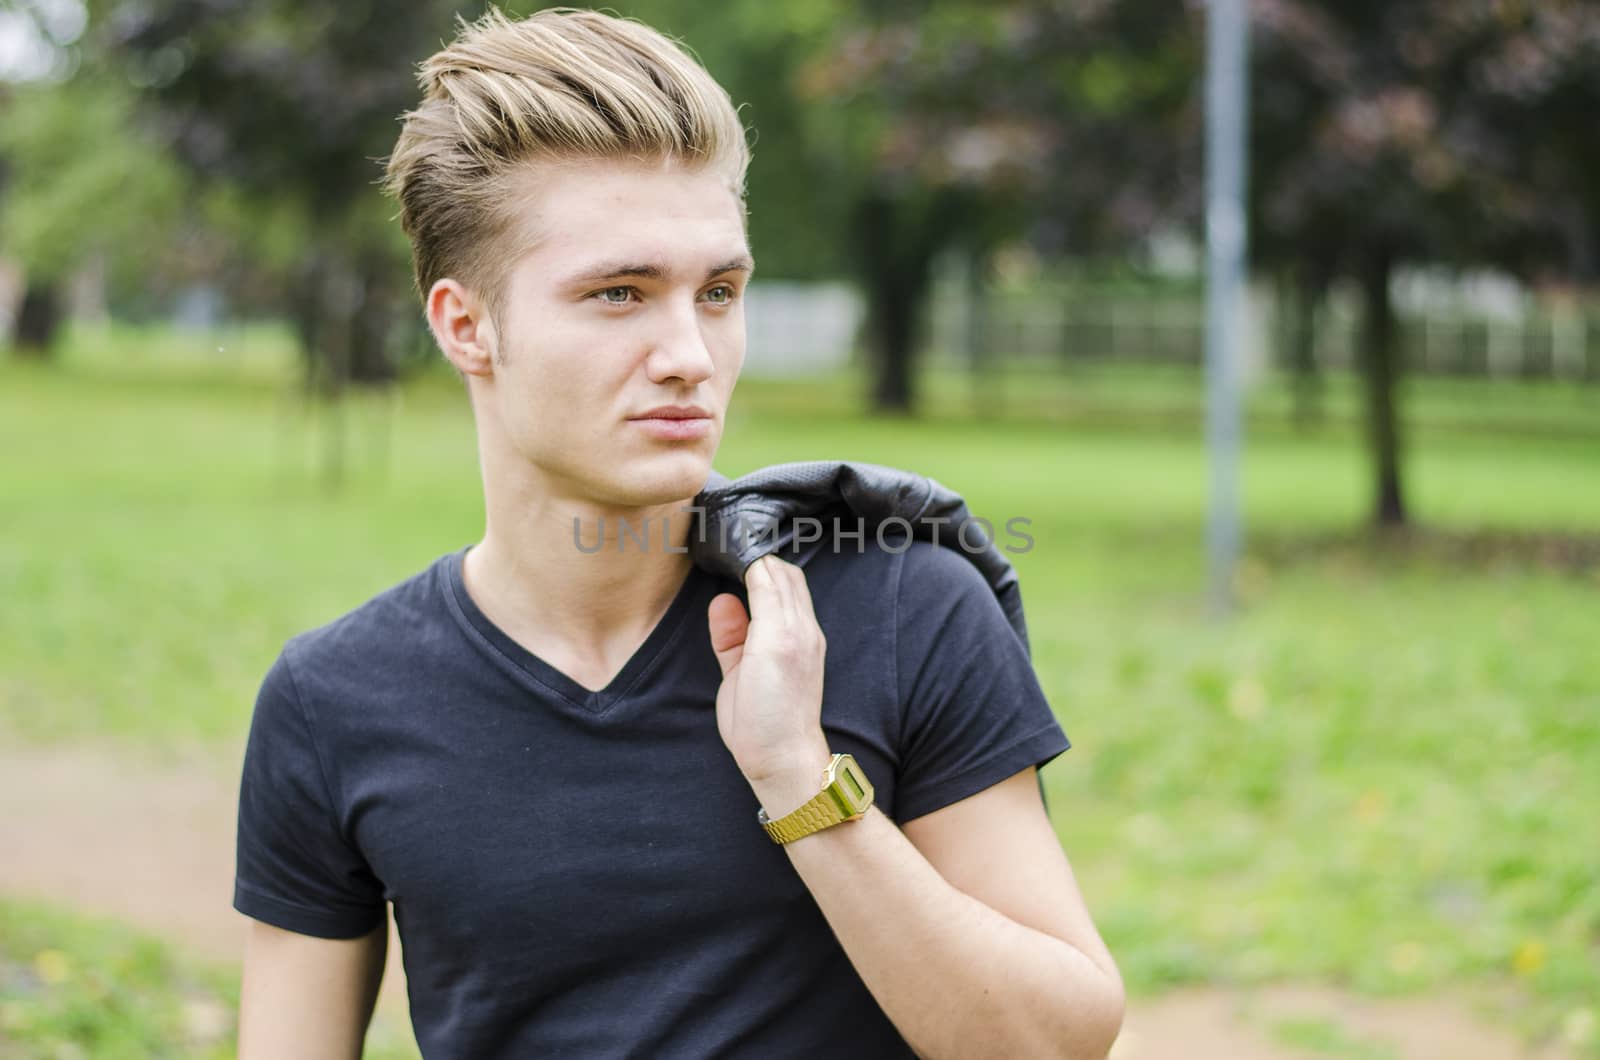 Attractive blond young man outdoors in a park by artofphoto